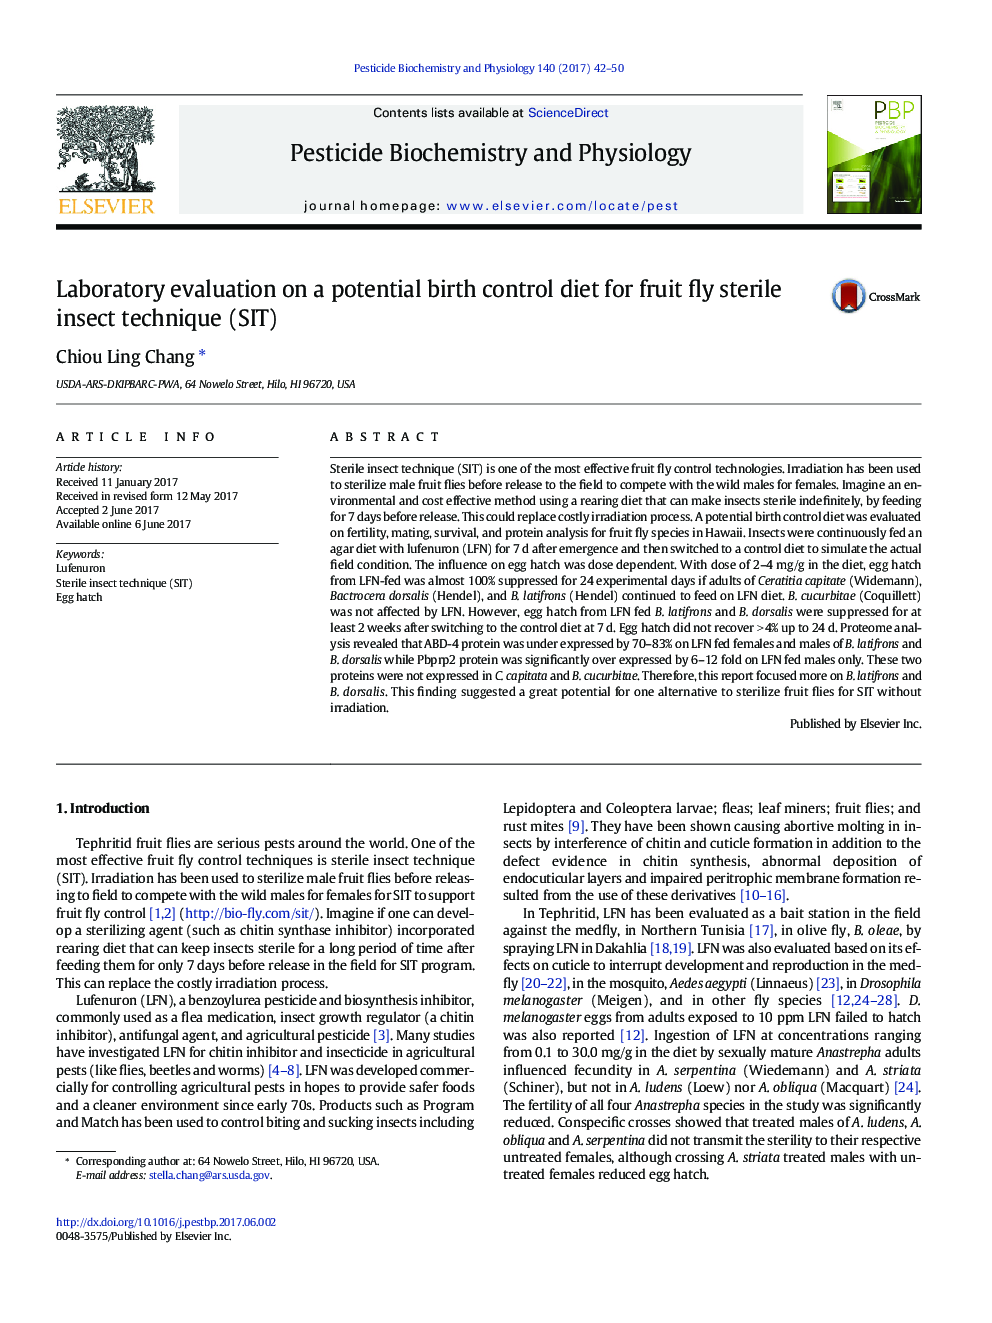 Laboratory evaluation on a potential birth control diet for fruit fly sterile insect technique (SIT)